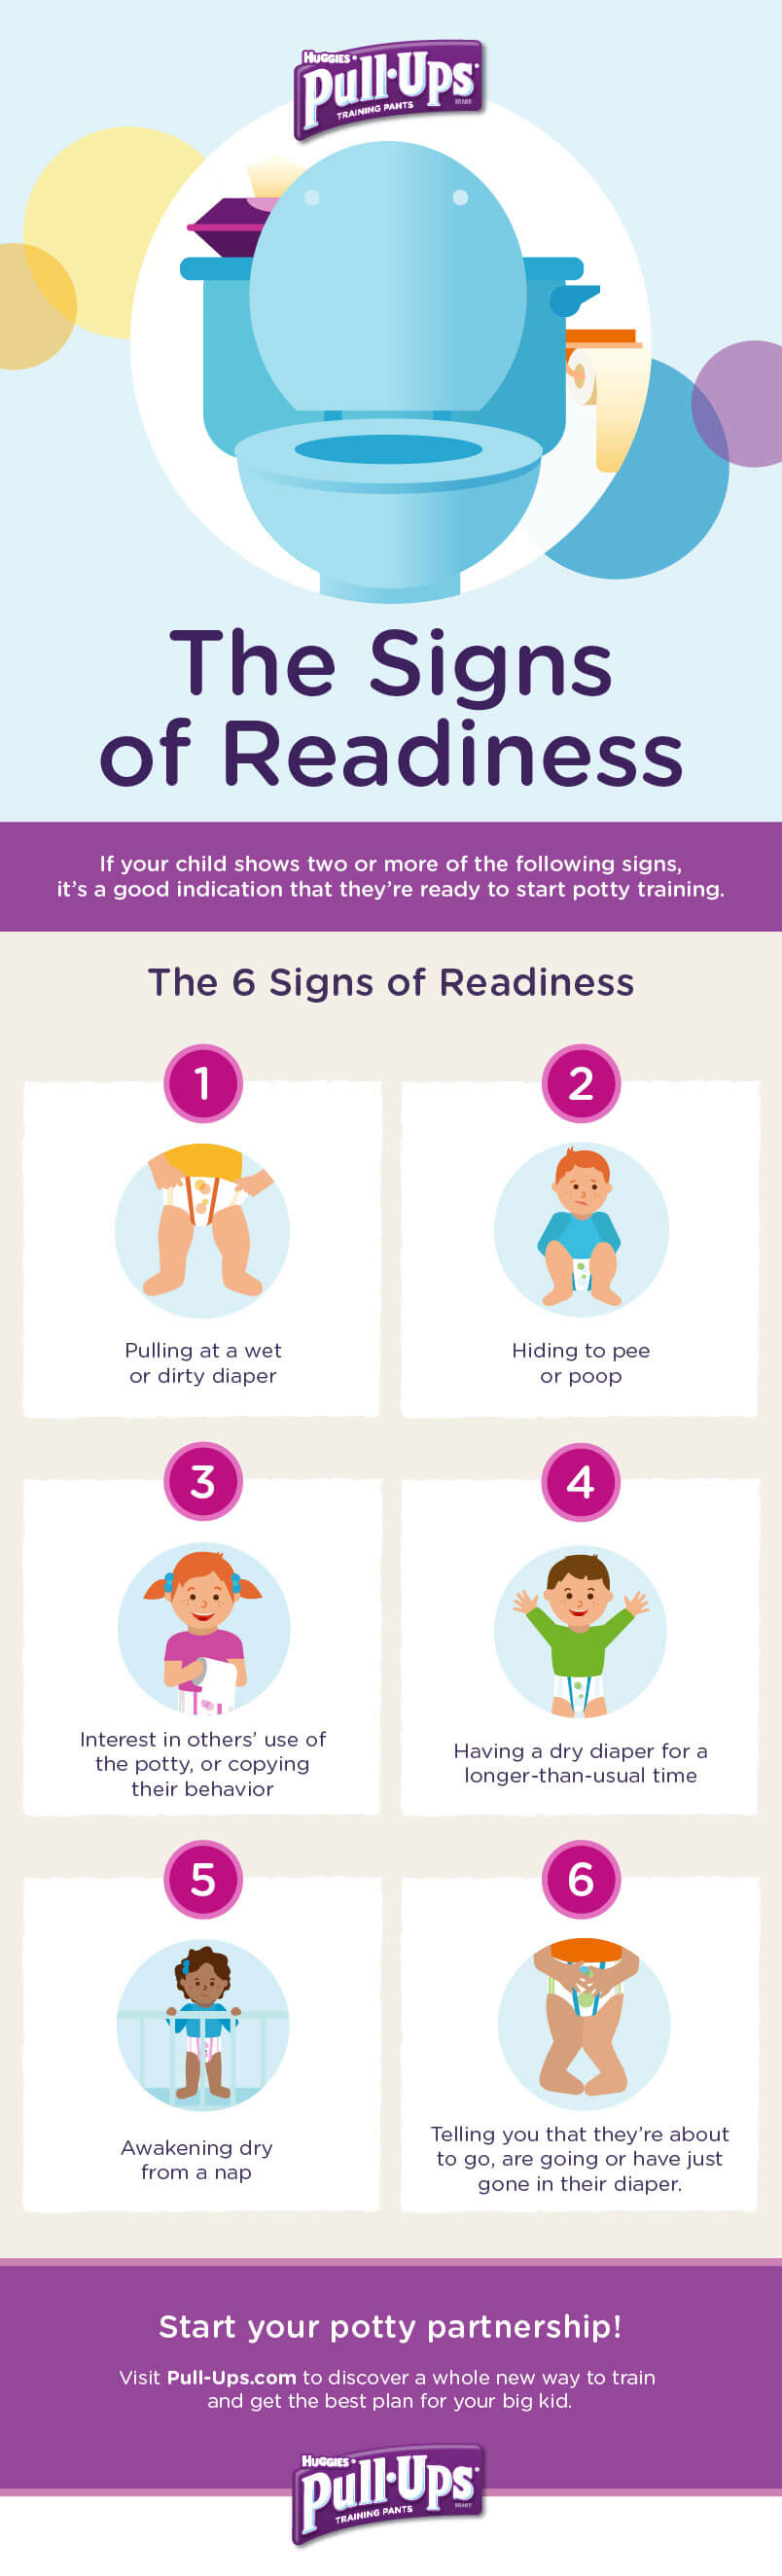 When To Start Potty Training: Signs Of Potty Training Readiness